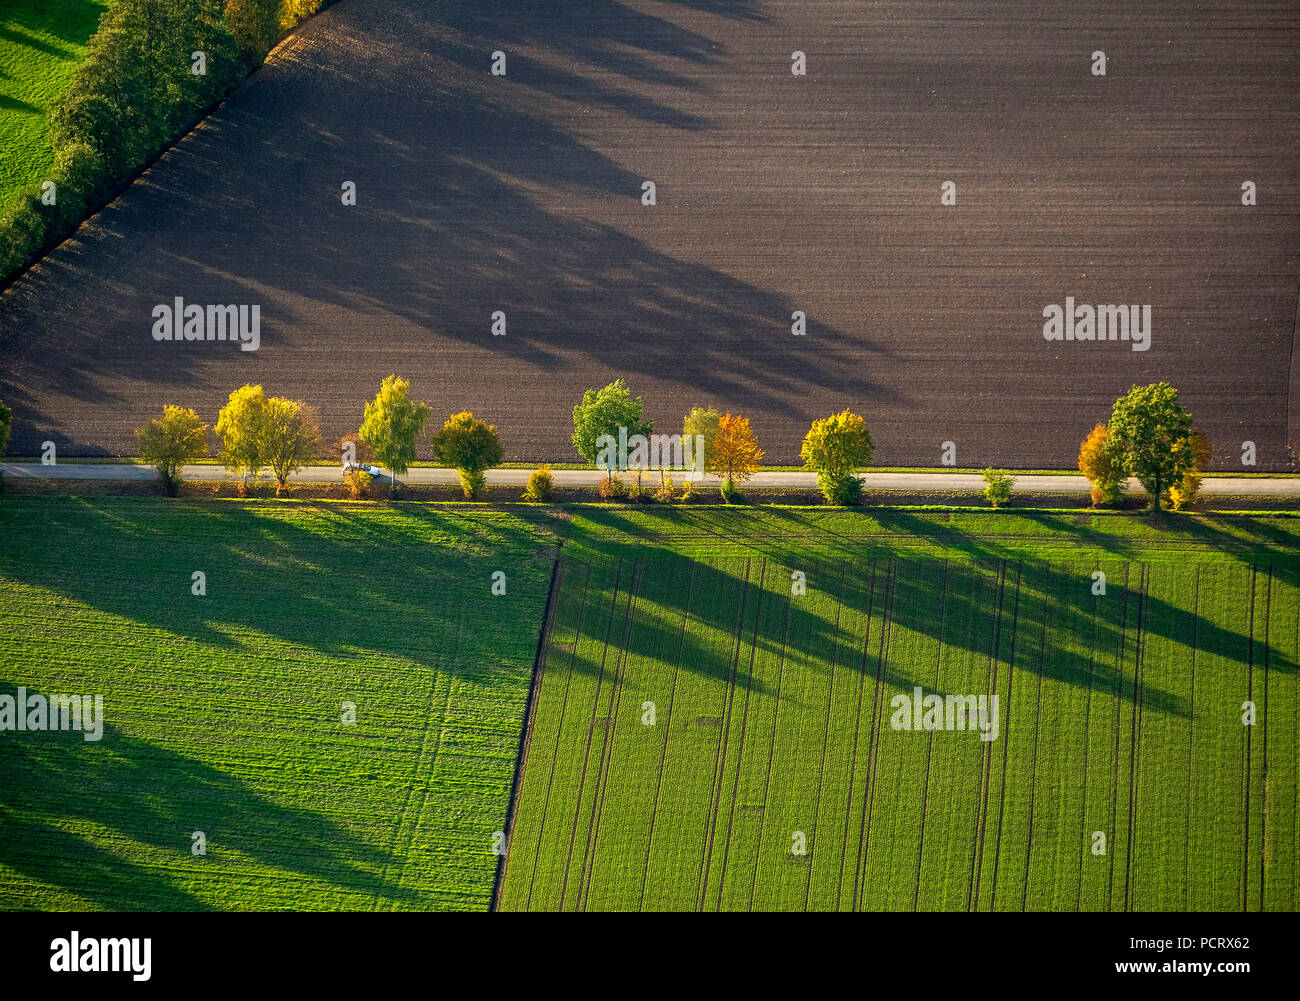 Row of trees, fields, autumn leaves, tree, trees, shadows, structures, aerial view of Werl, Soester Börde Stock Photo